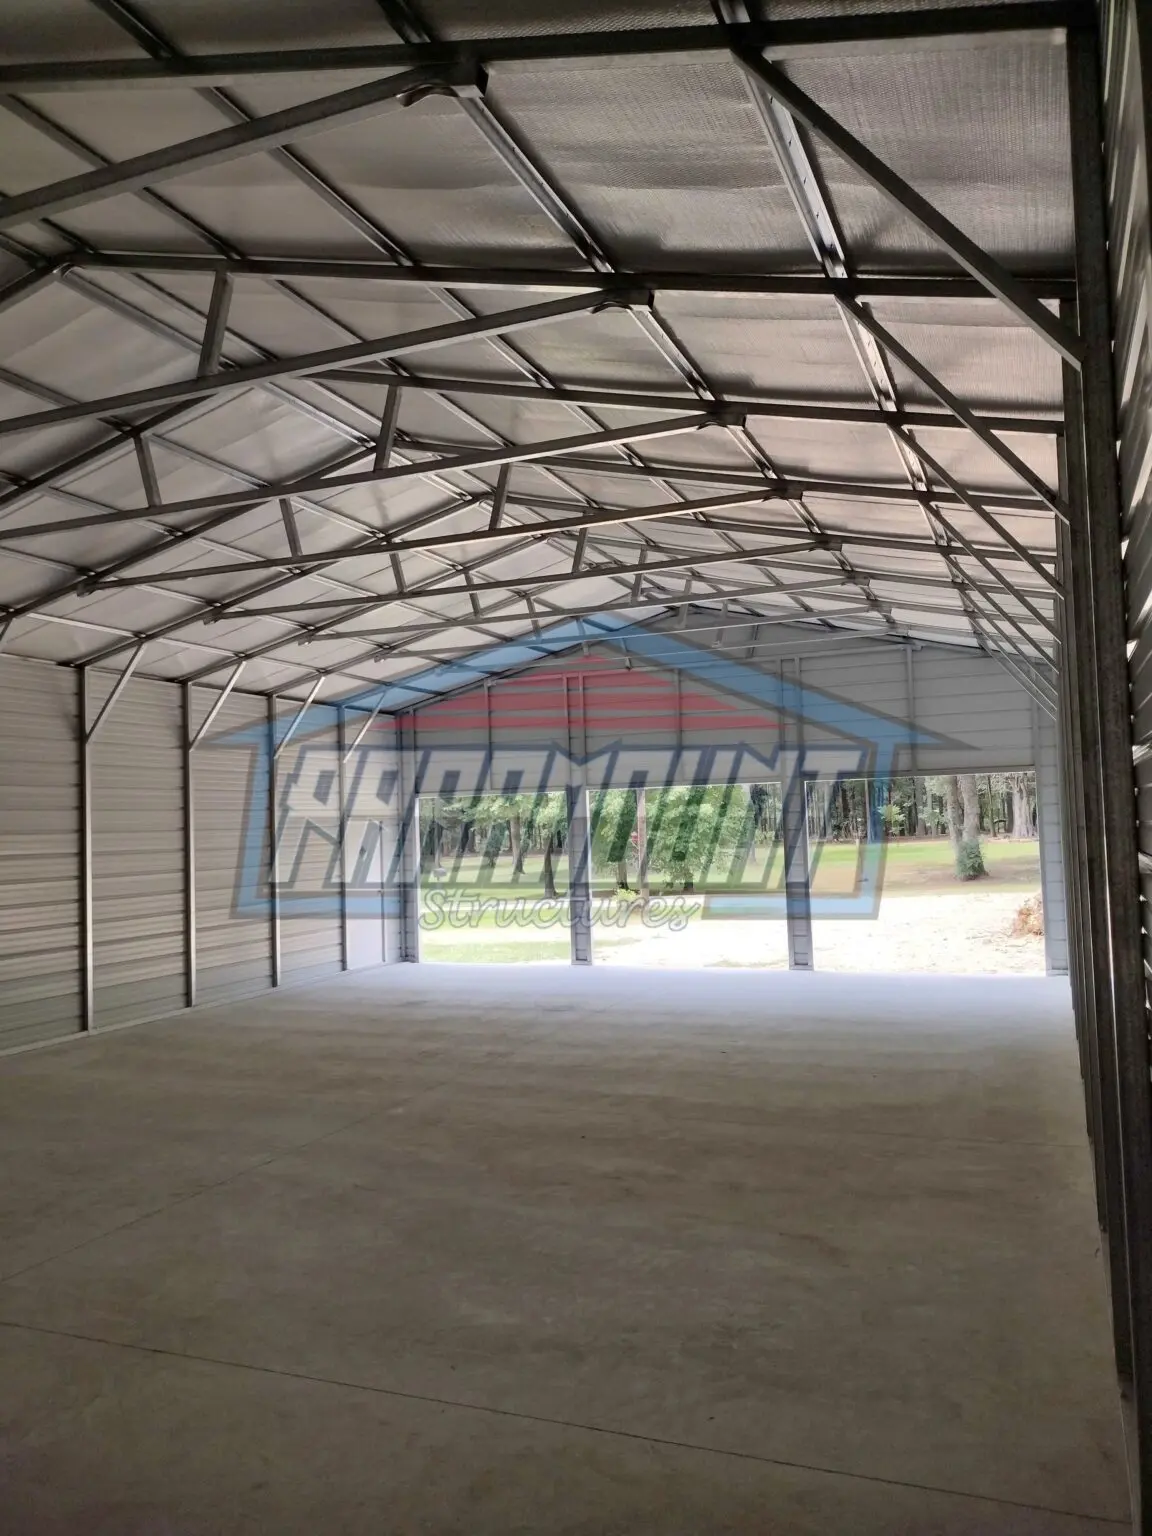 A garage with a metal roof and concrete floor.